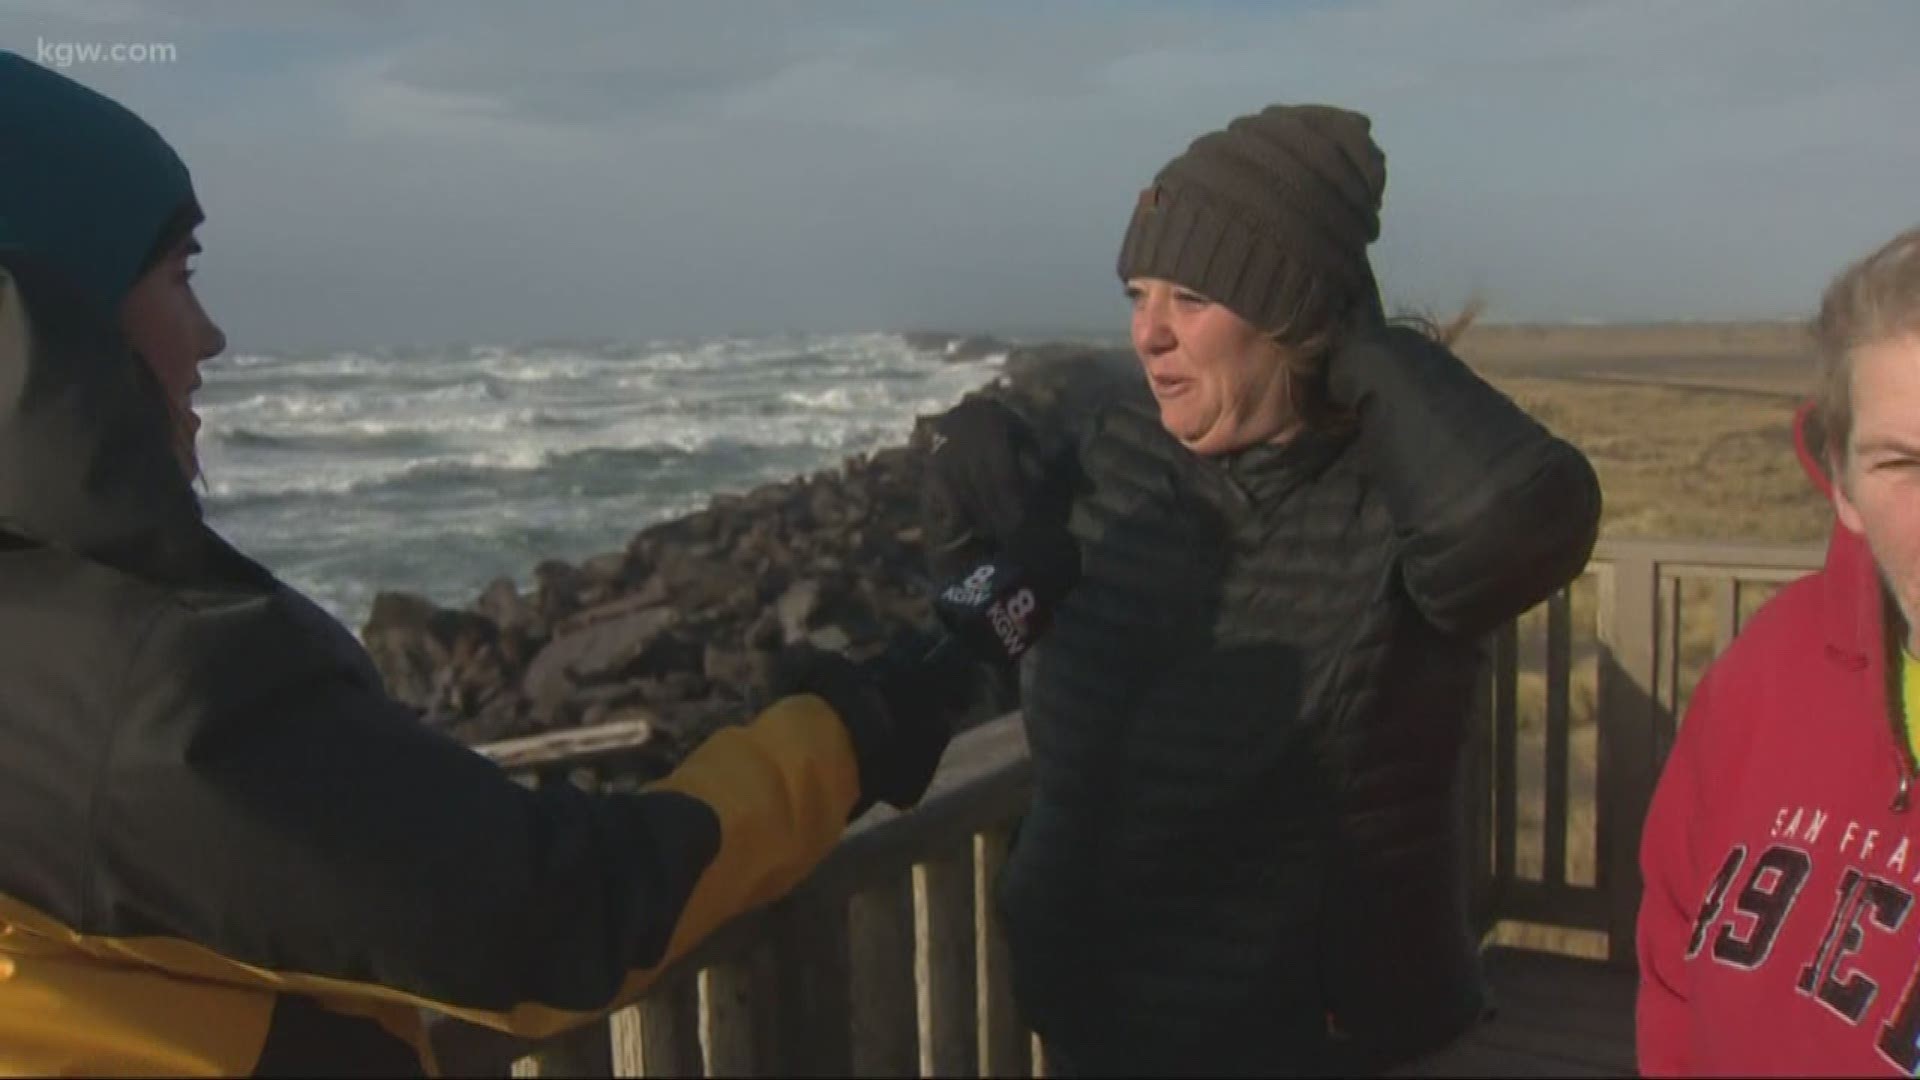 Storm-lovers flocked to the Oregon Coast for a windy day.